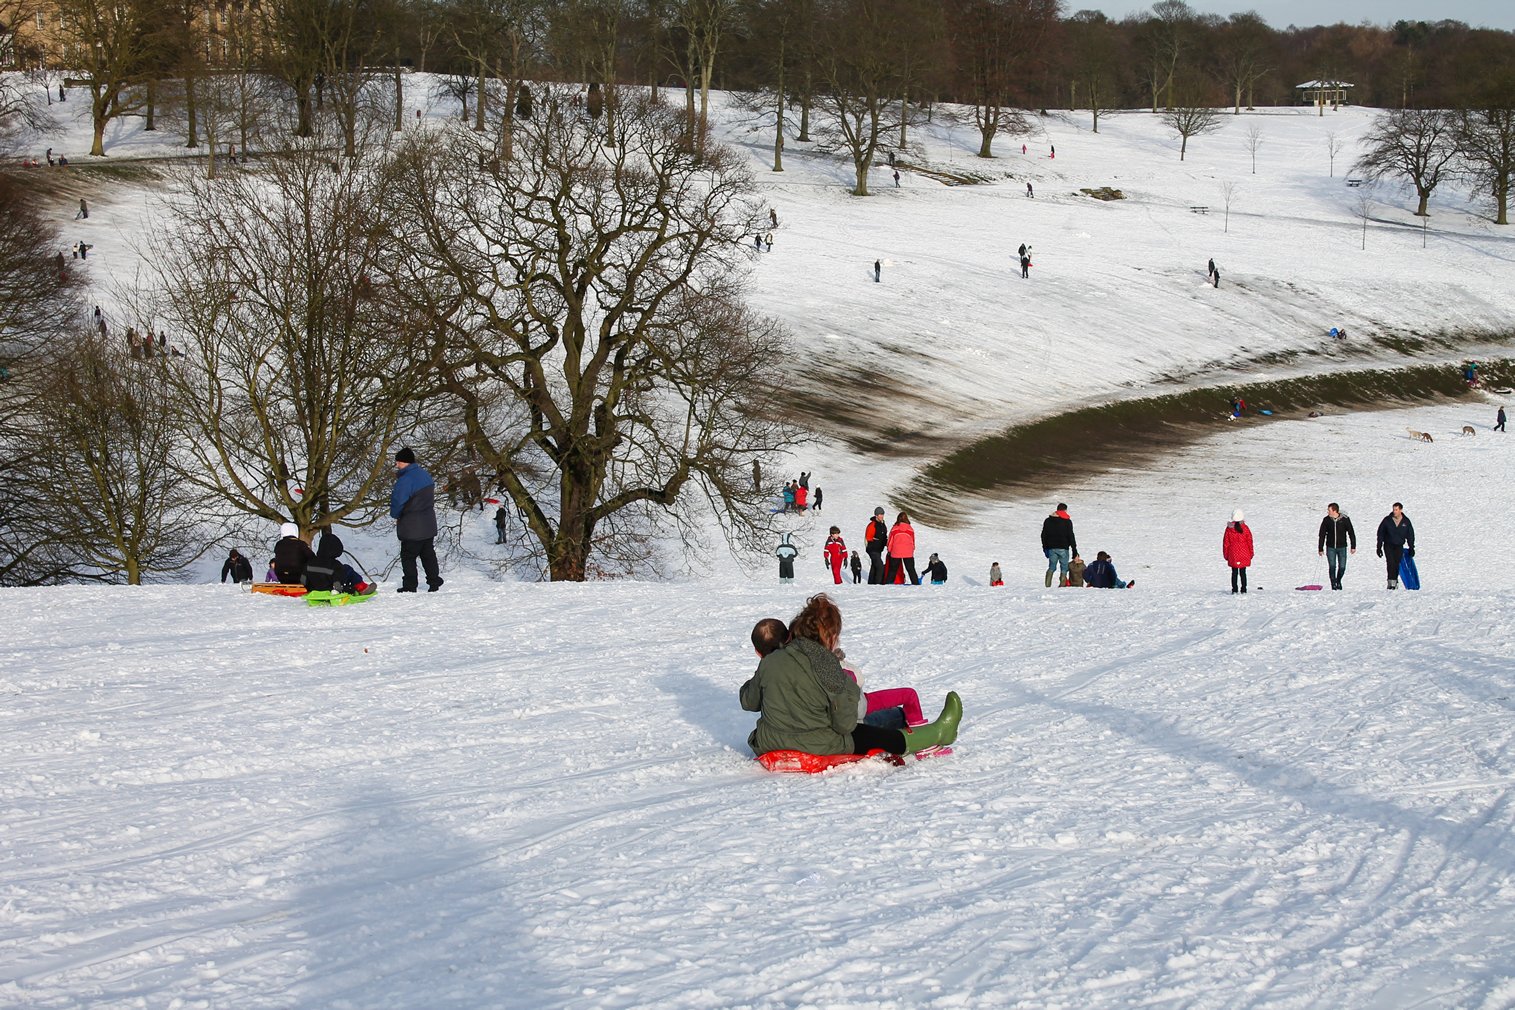 Image name sledging roundhay park the 22 image from the post Cold weather activities in Yorkshire in Yorkshire.com.